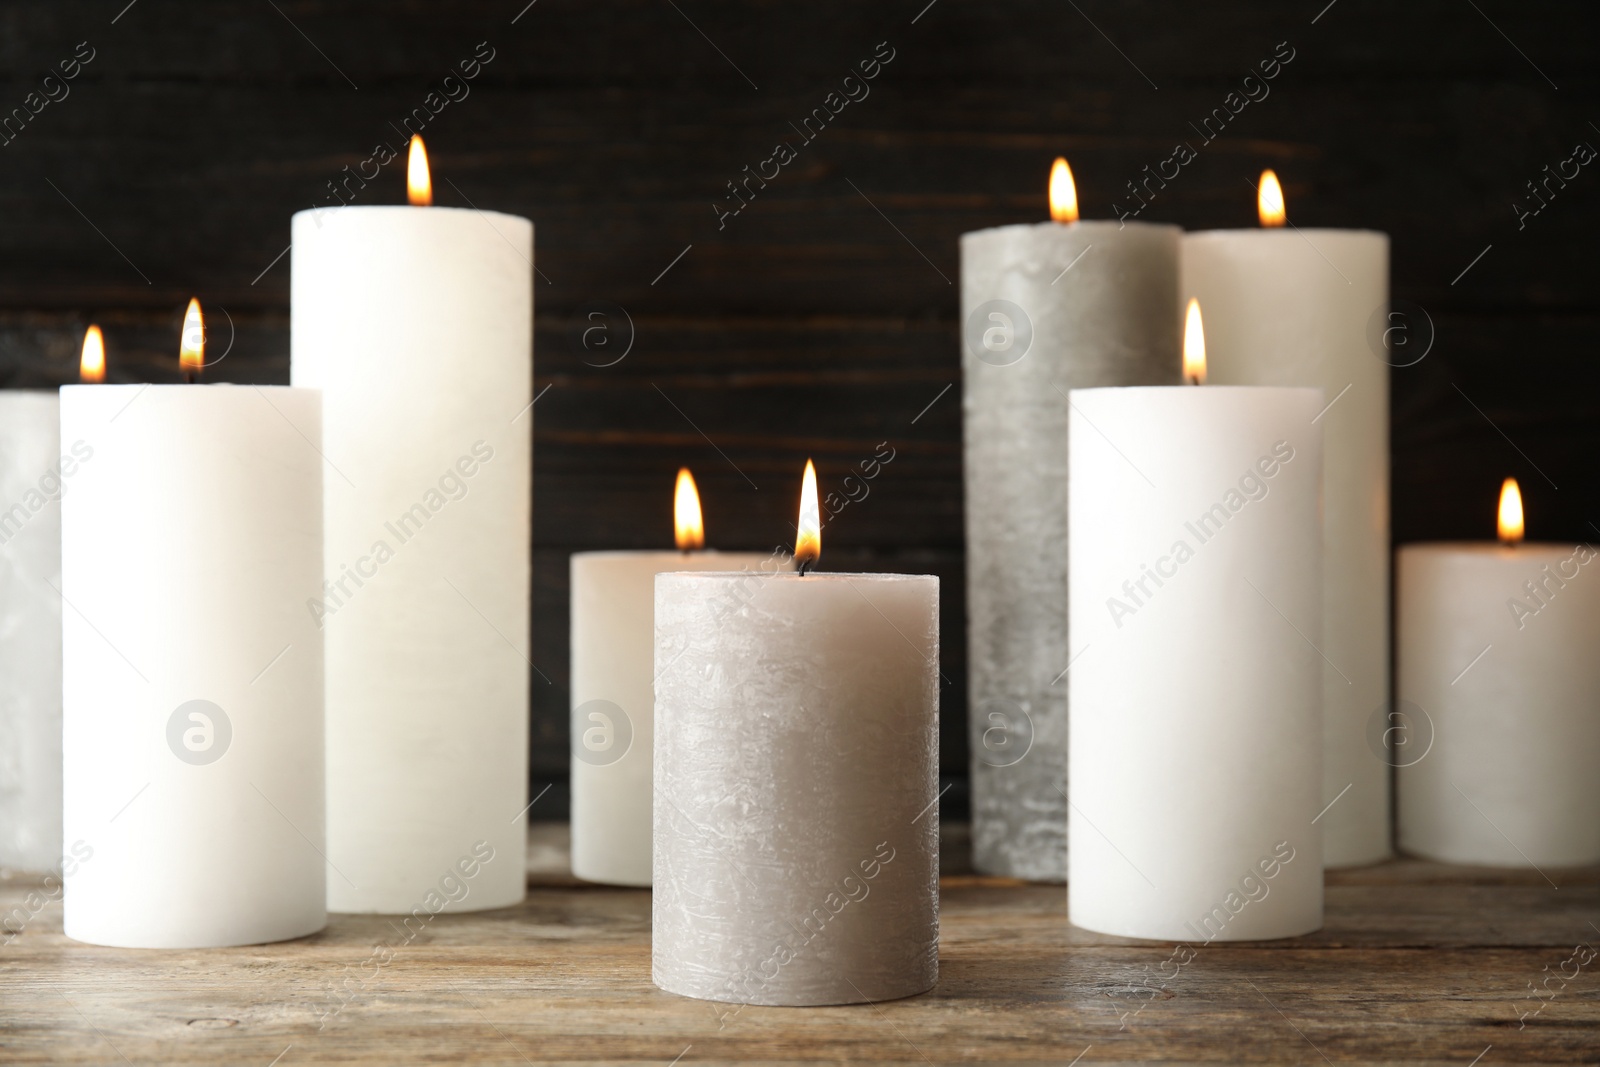 Photo of Many alight wax candles on table against dark background